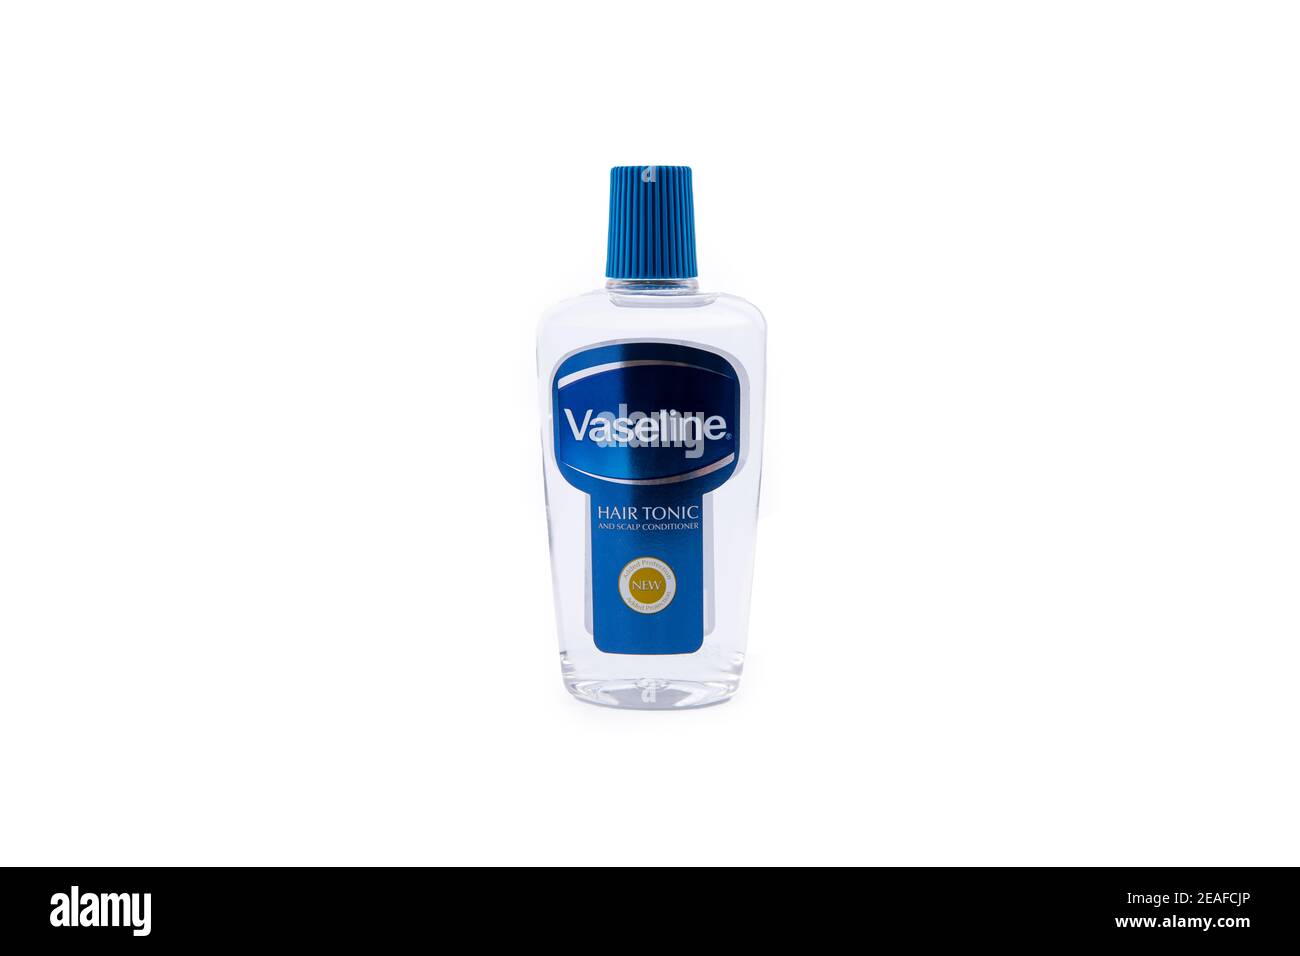 Vaseline Hair Tonic High Resolution Stock Photography and Images - Alamy